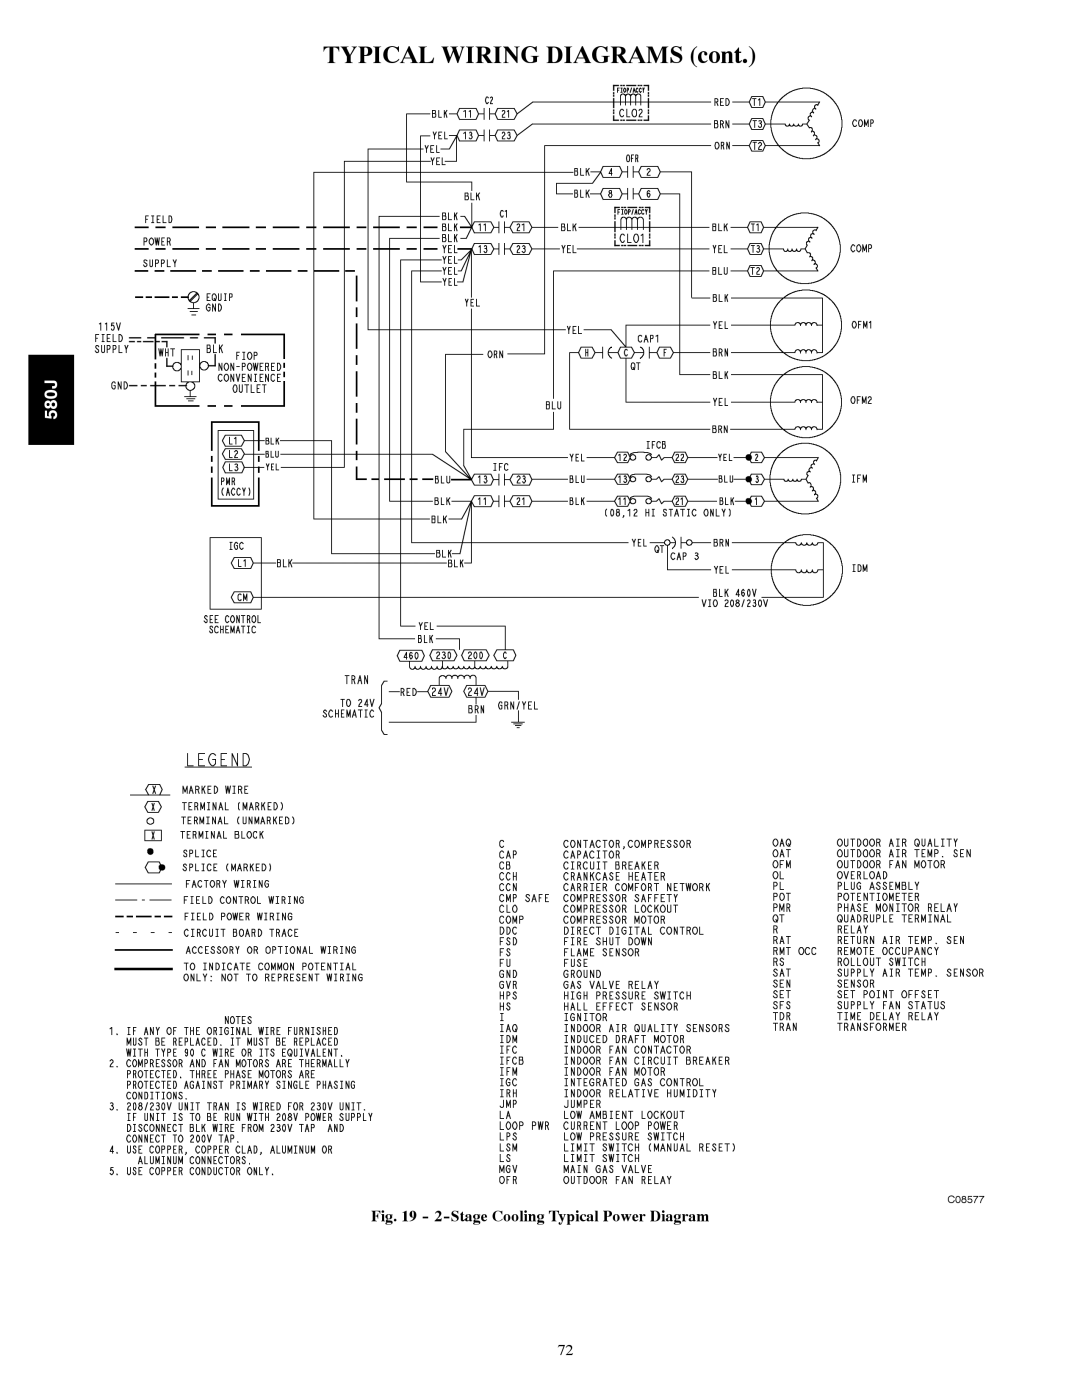 Bryant 580J manual TYPICAL WIRING DIAGRAMS cont, 2-StageCooling Typical Power Diagram, C08577 